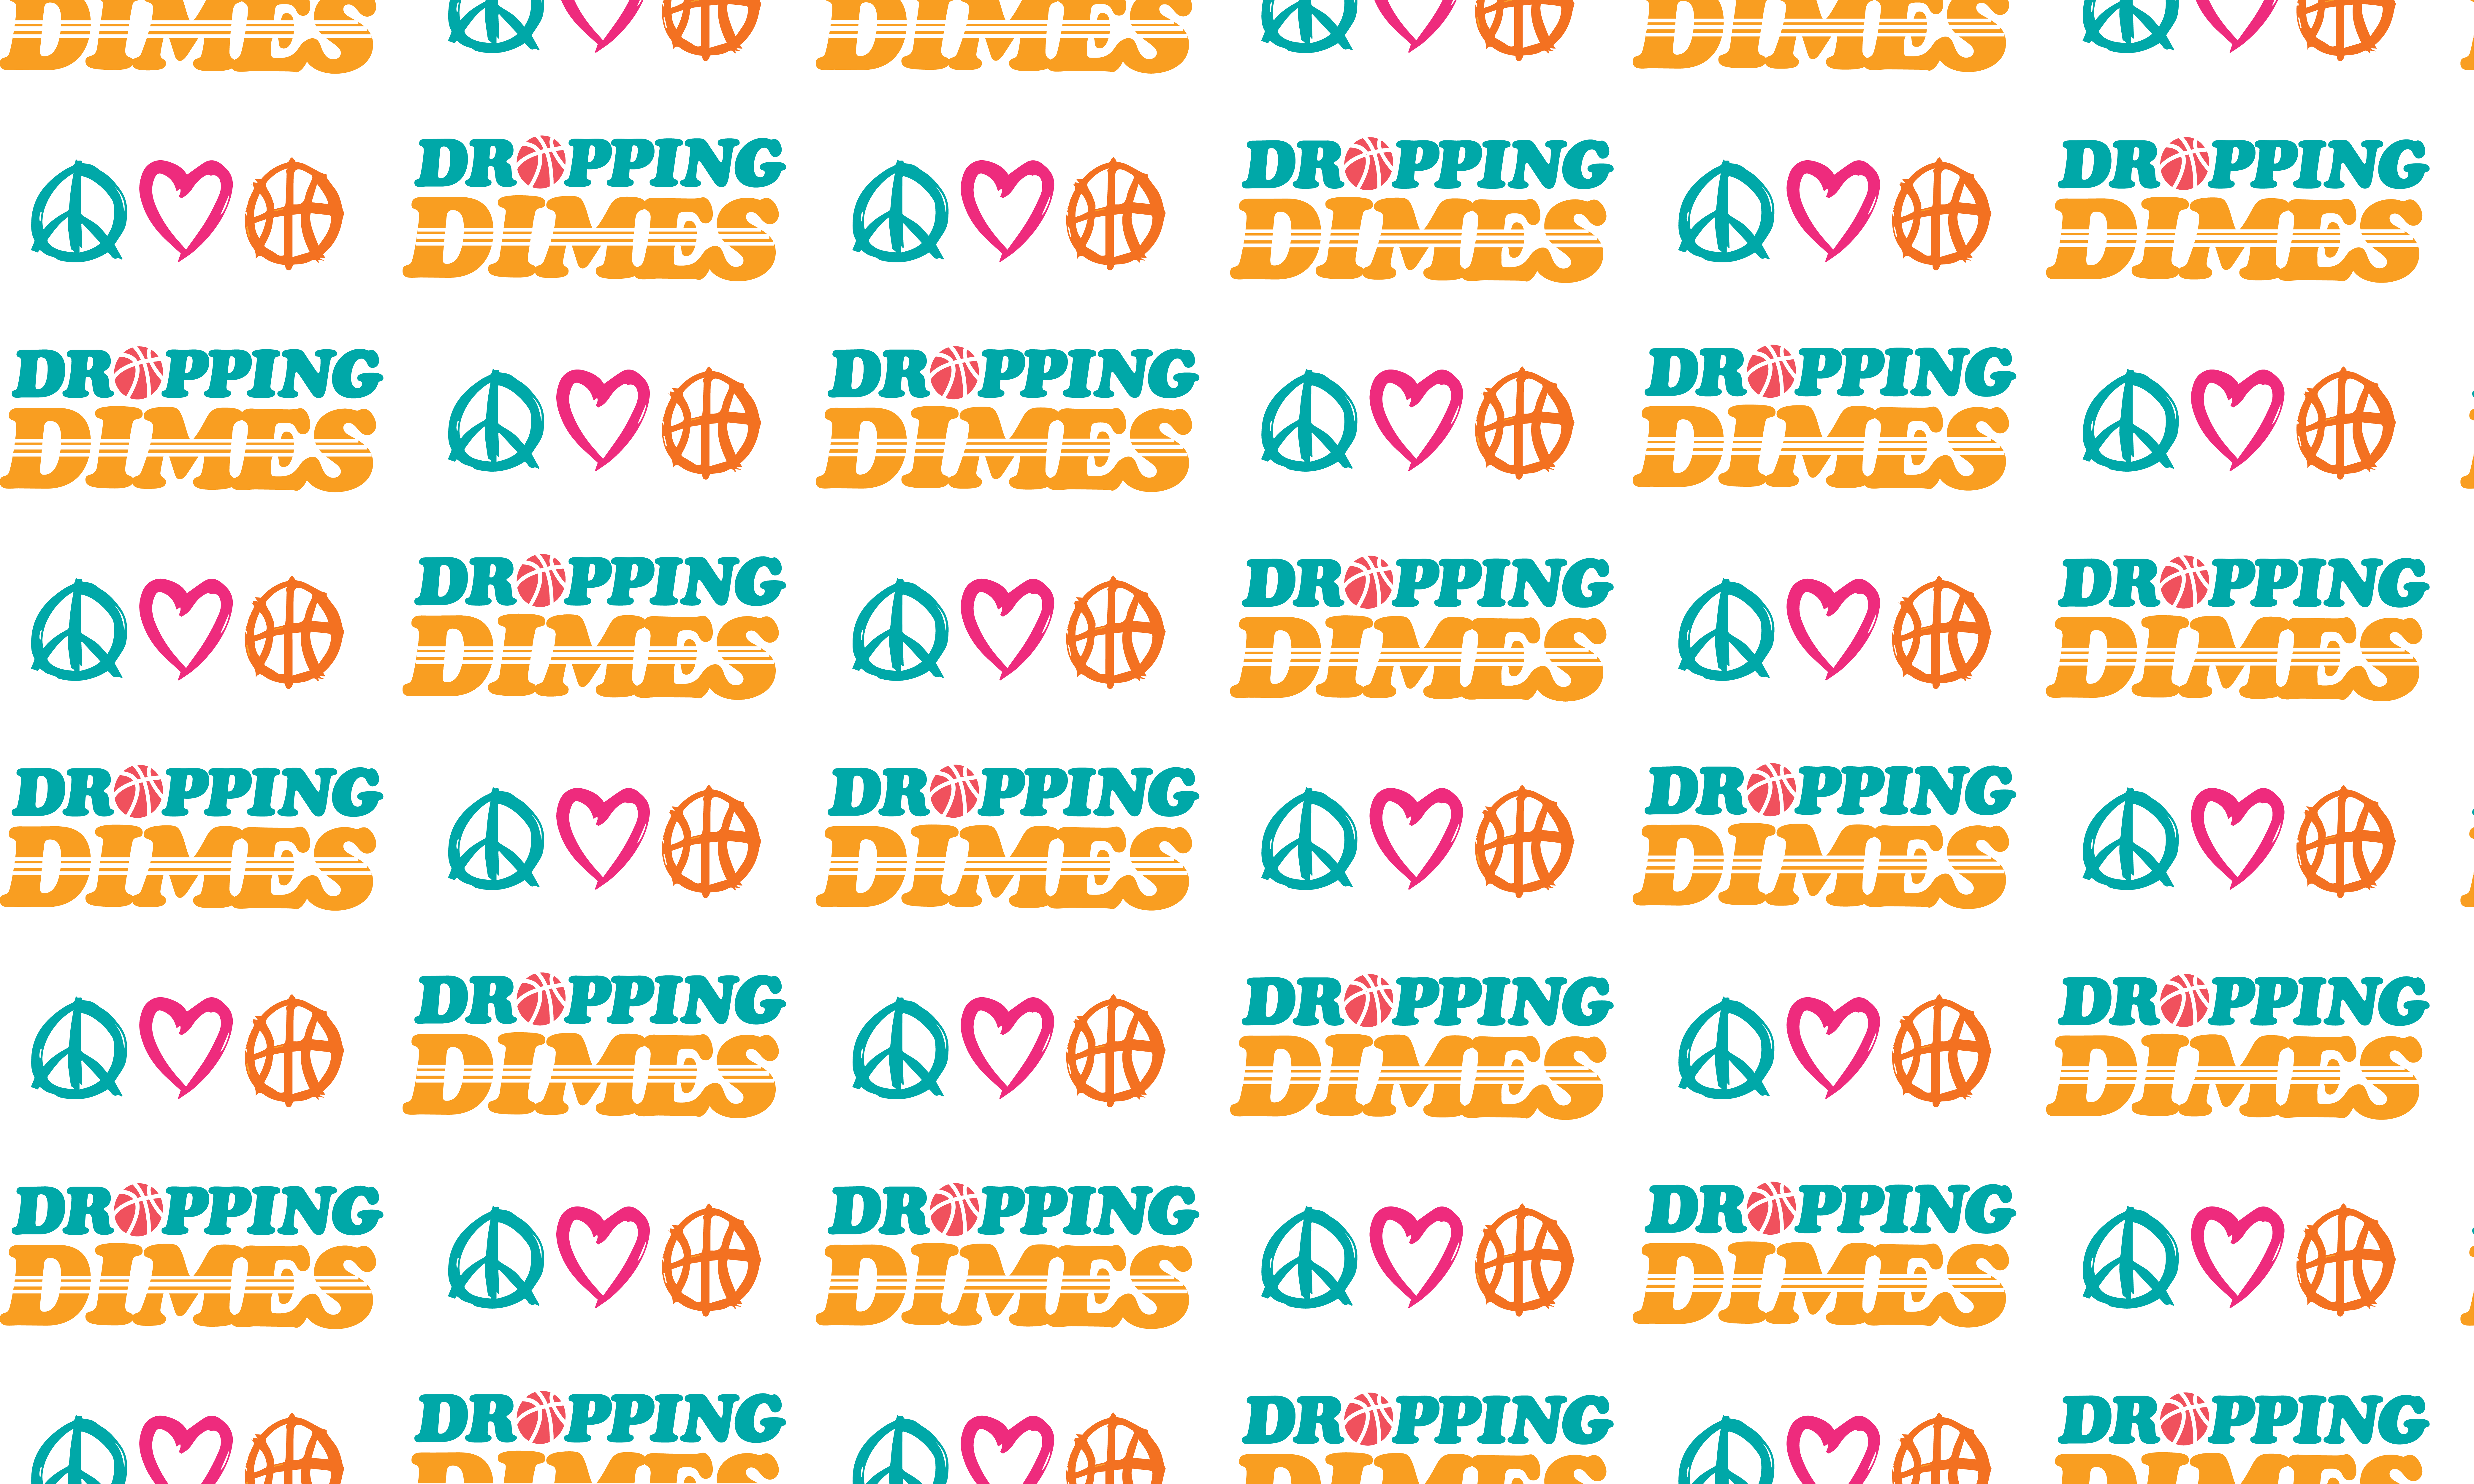 Website wallpaper - the phrase Dropping Dimes repeated in a pattern with the symbols for love, peace, and basketball